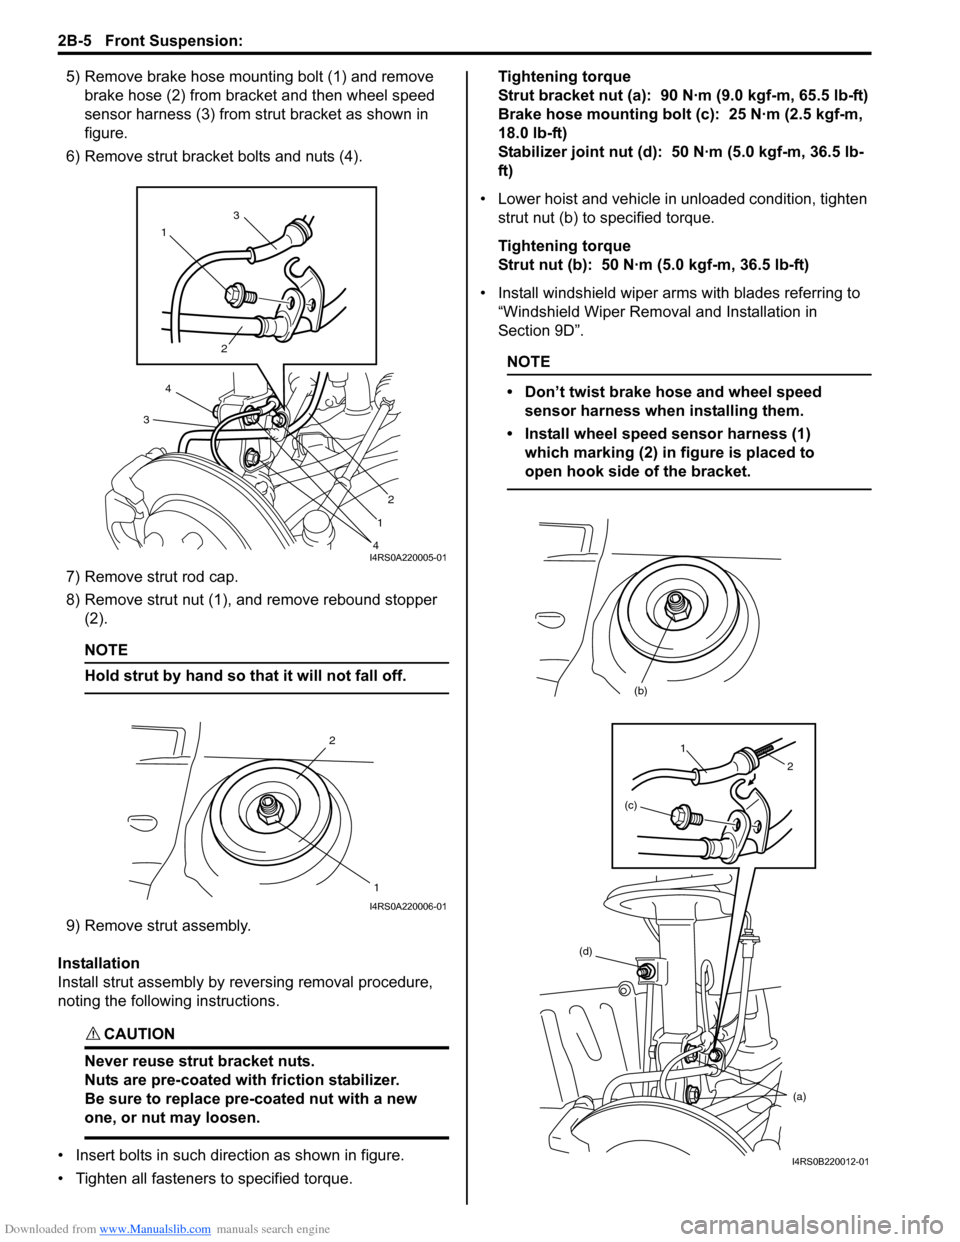 SUZUKI SWIFT 2006 2.G Service Workshop Manual Downloaded from www.Manualslib.com manuals search engine 2B-5 Front Suspension: 
5) Remove brake hose mounting bolt (1) and remove brake hose (2) from bracket and then wheel speed 
sensor harness (3) 